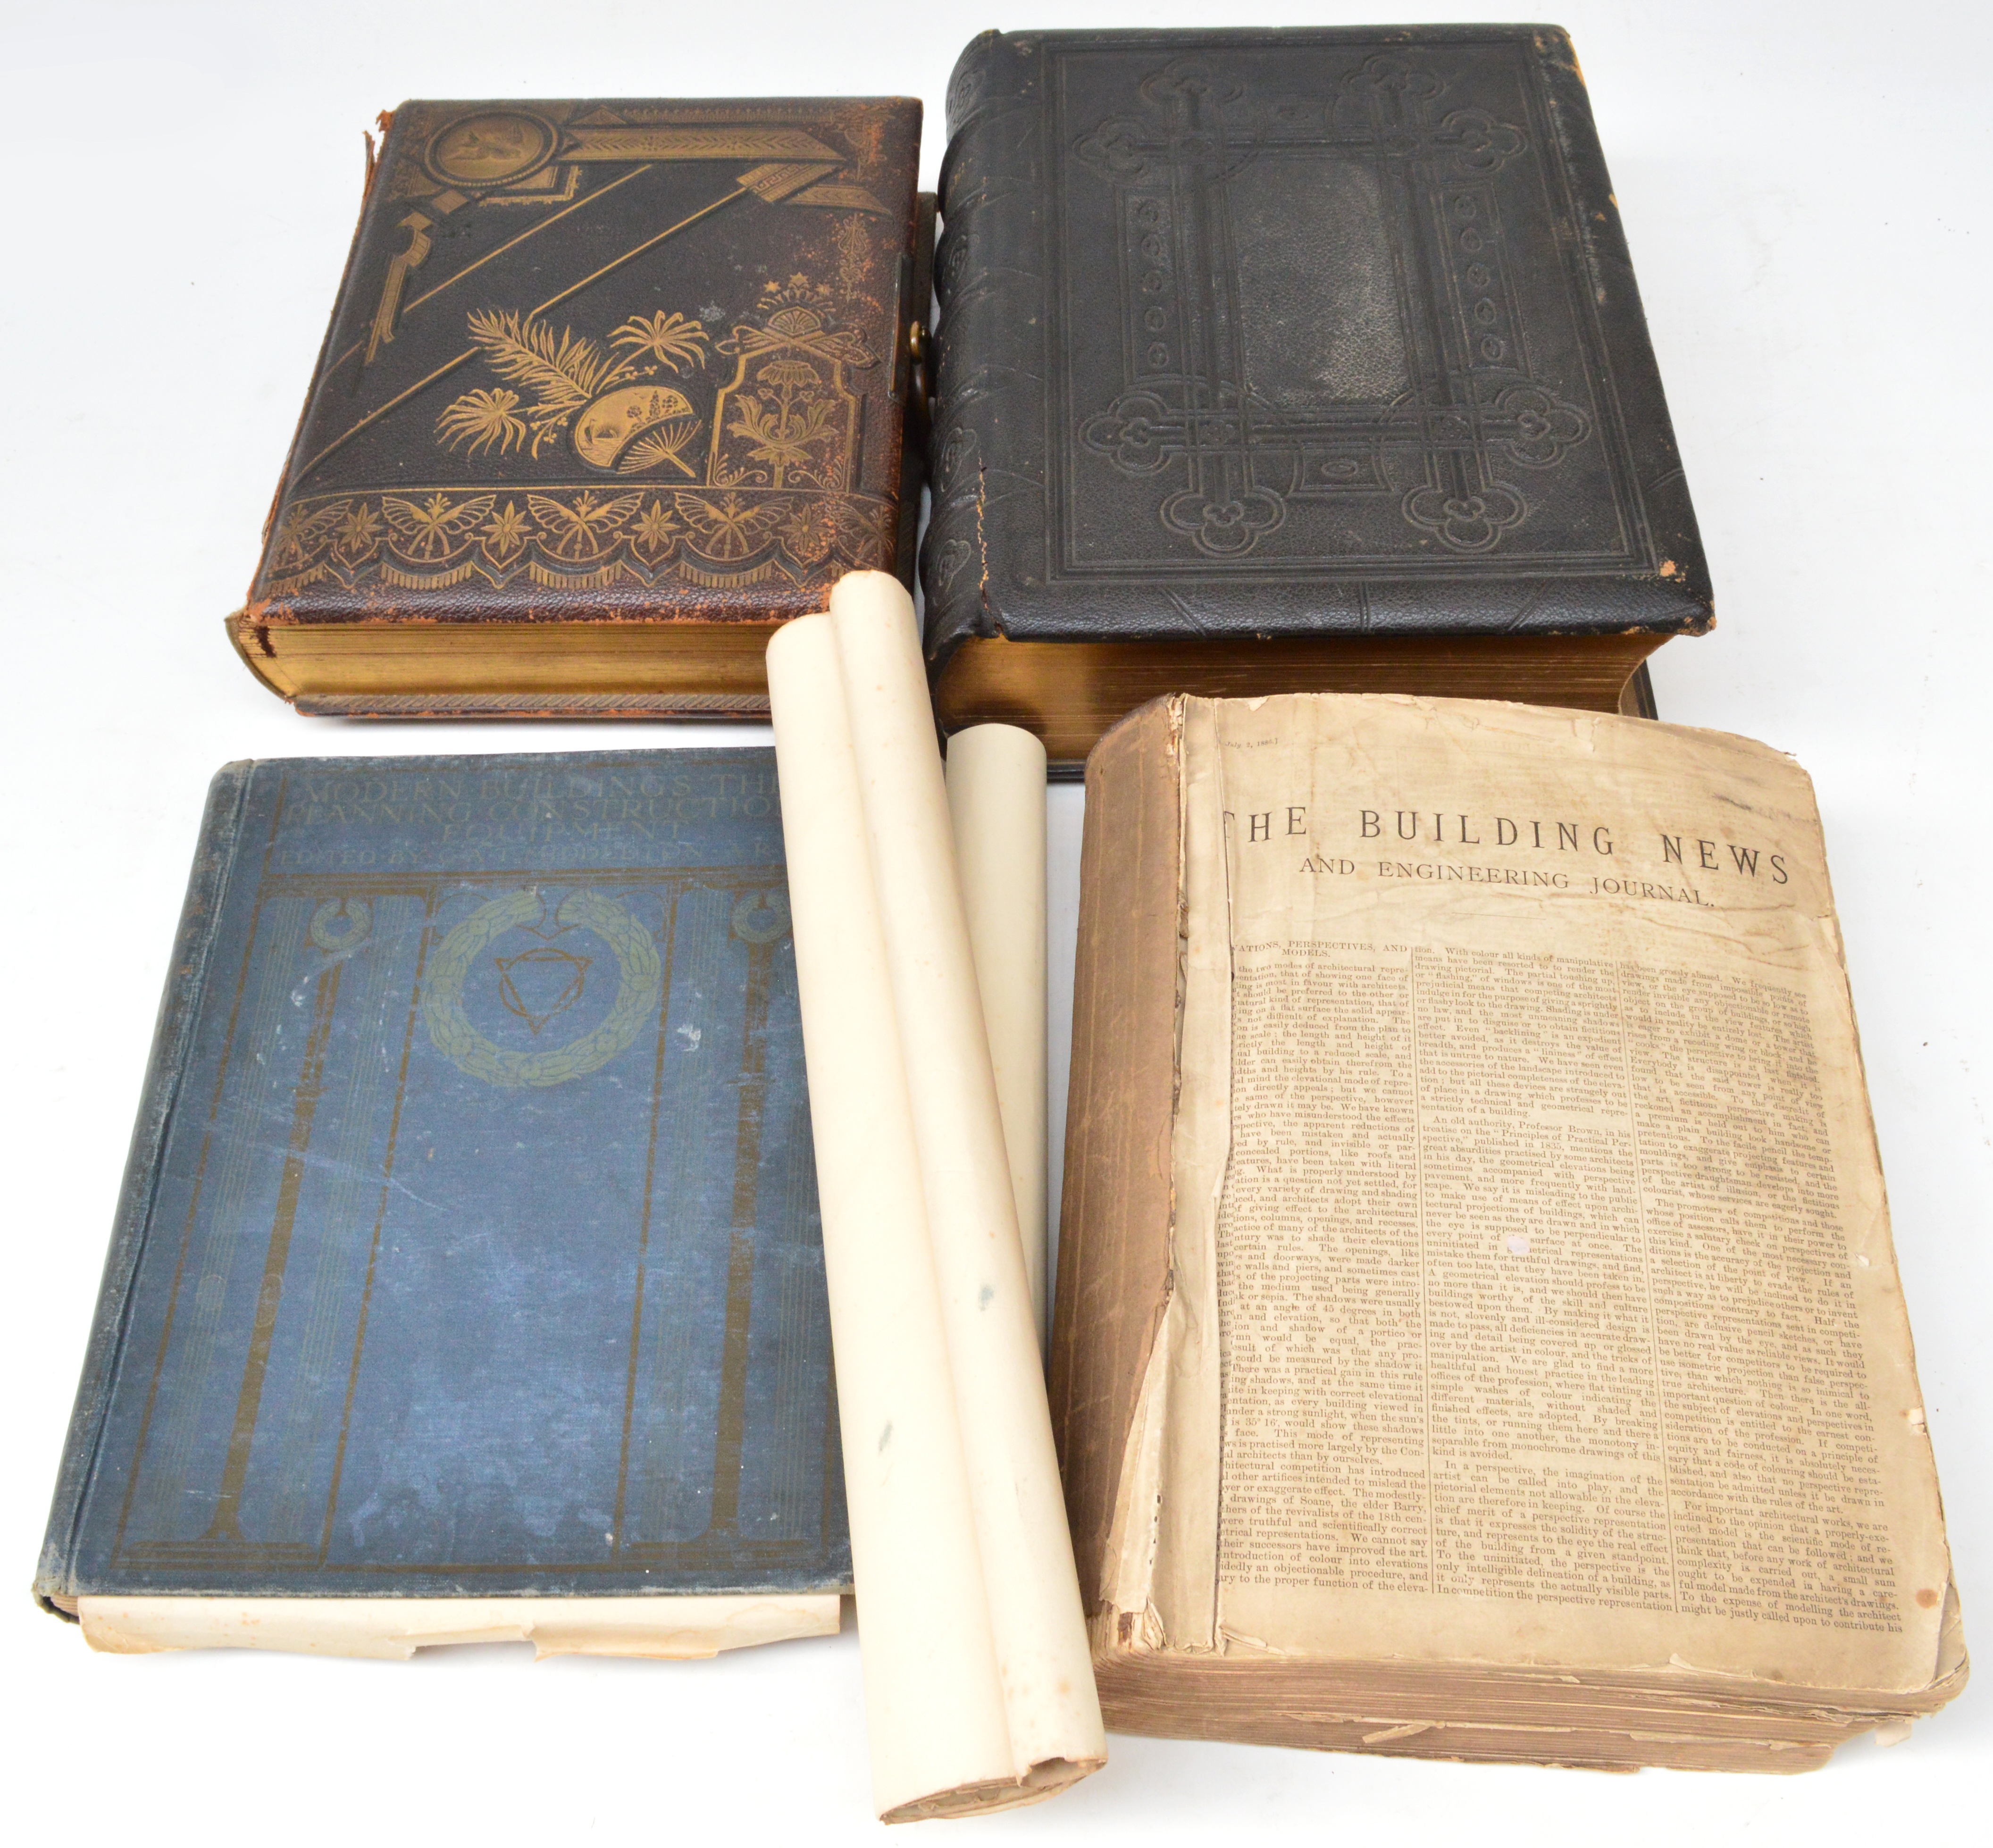 A 19th century photograph album with musical movement, a 19th century family bible, Modern